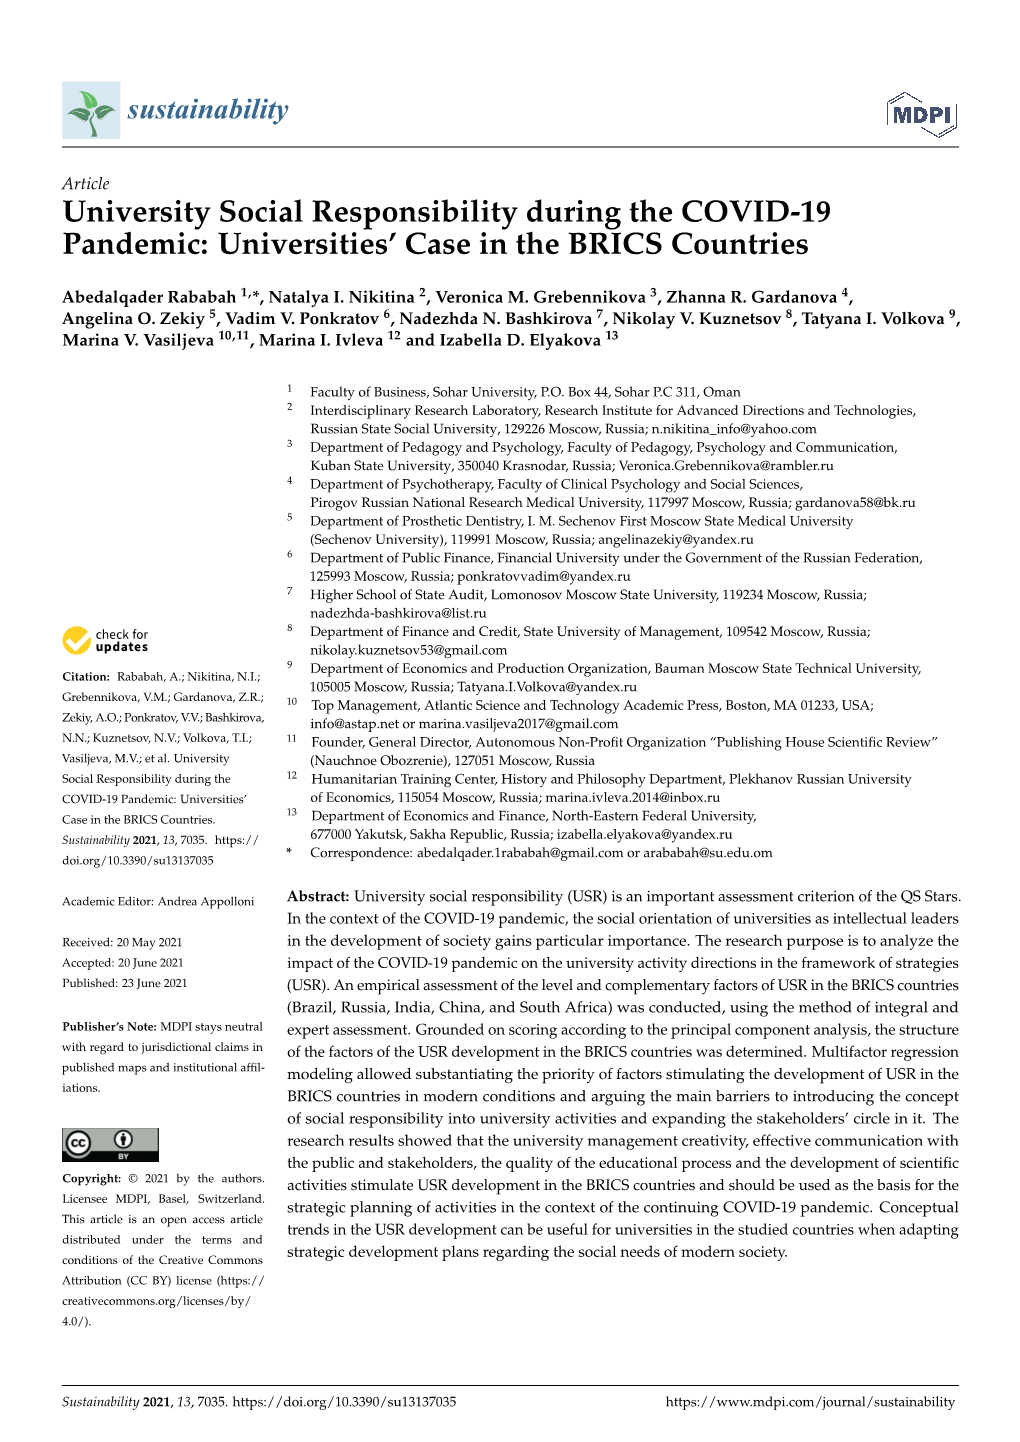 University Social Responsibility During the COVID-19 Pandemic: Universities’ Case in the BRICS Countries